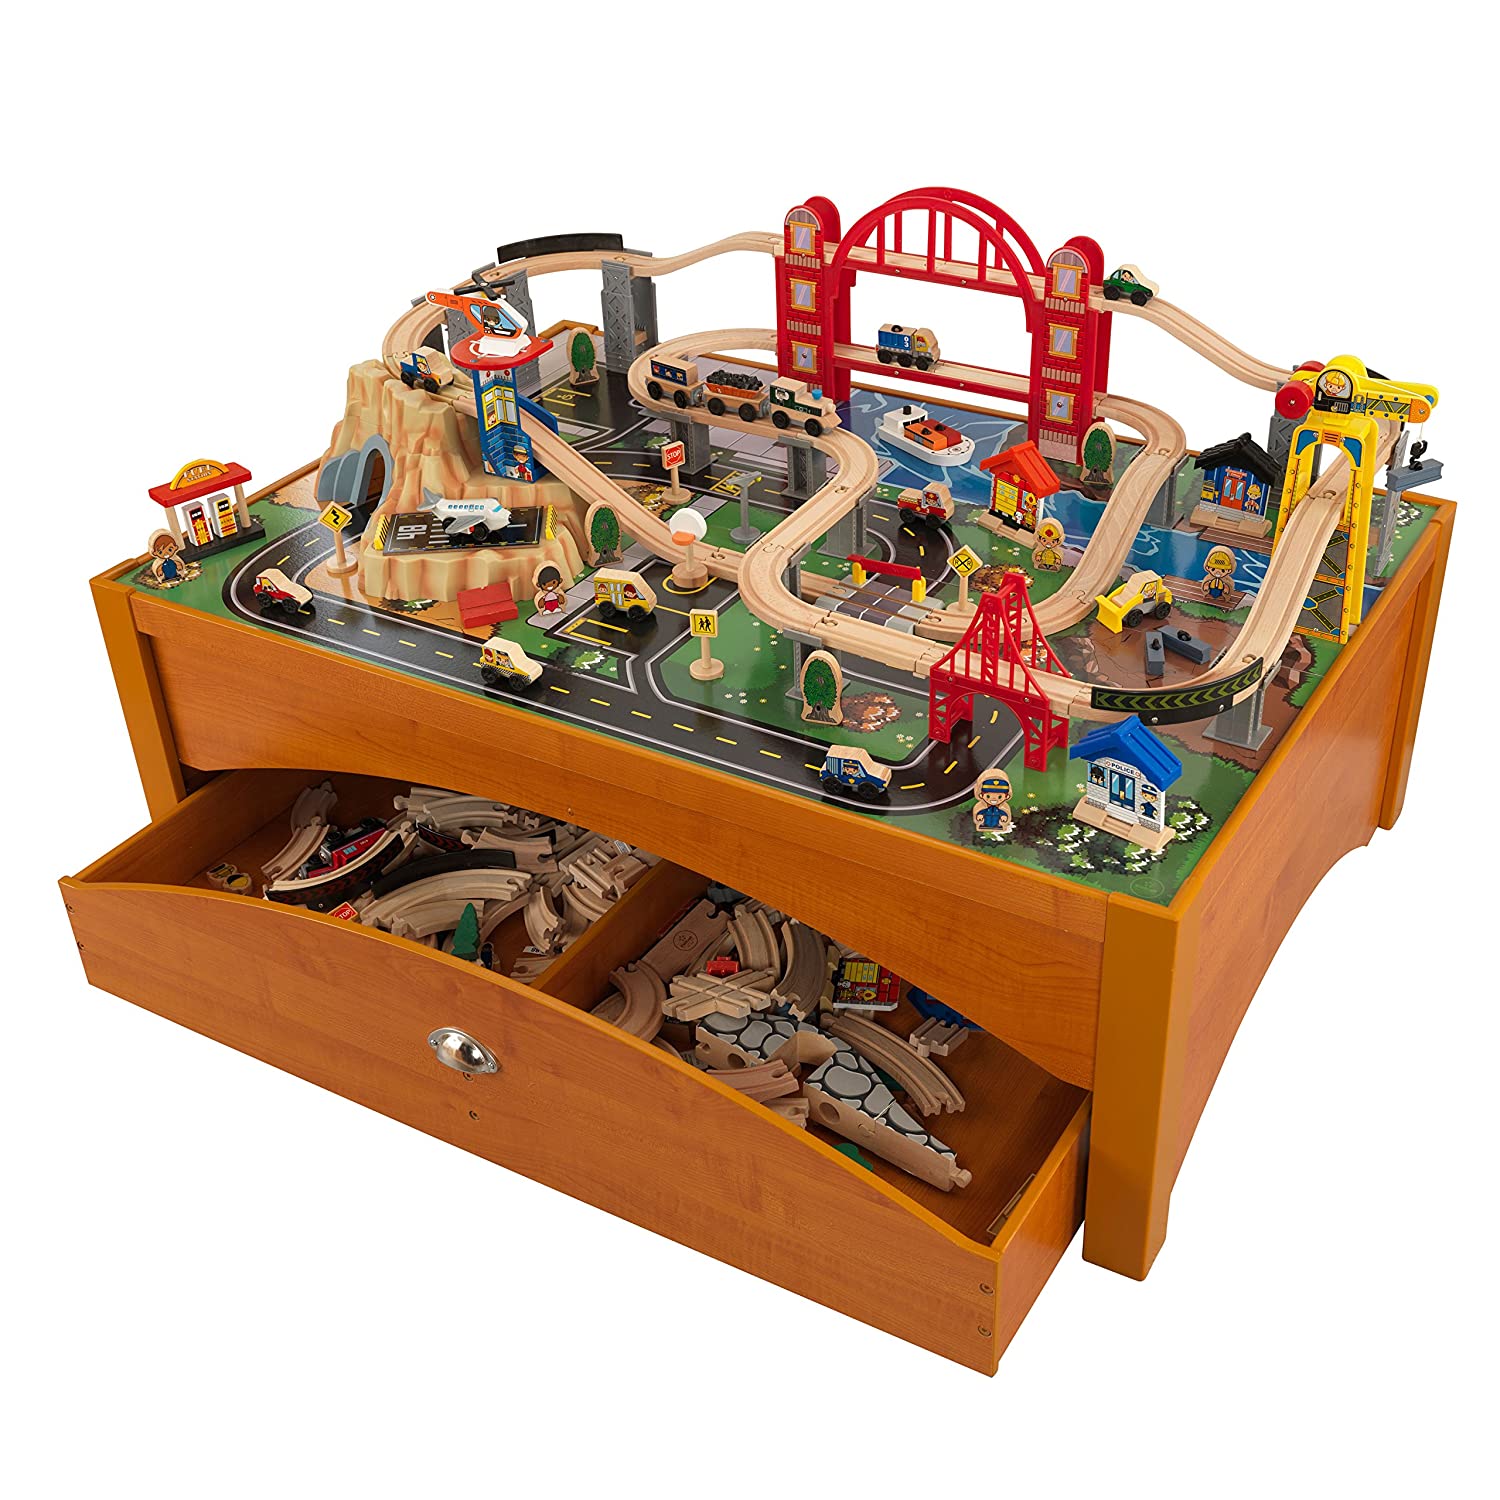 10 Best Train Tables For Toddlers & Kids Reviews in 2022 1